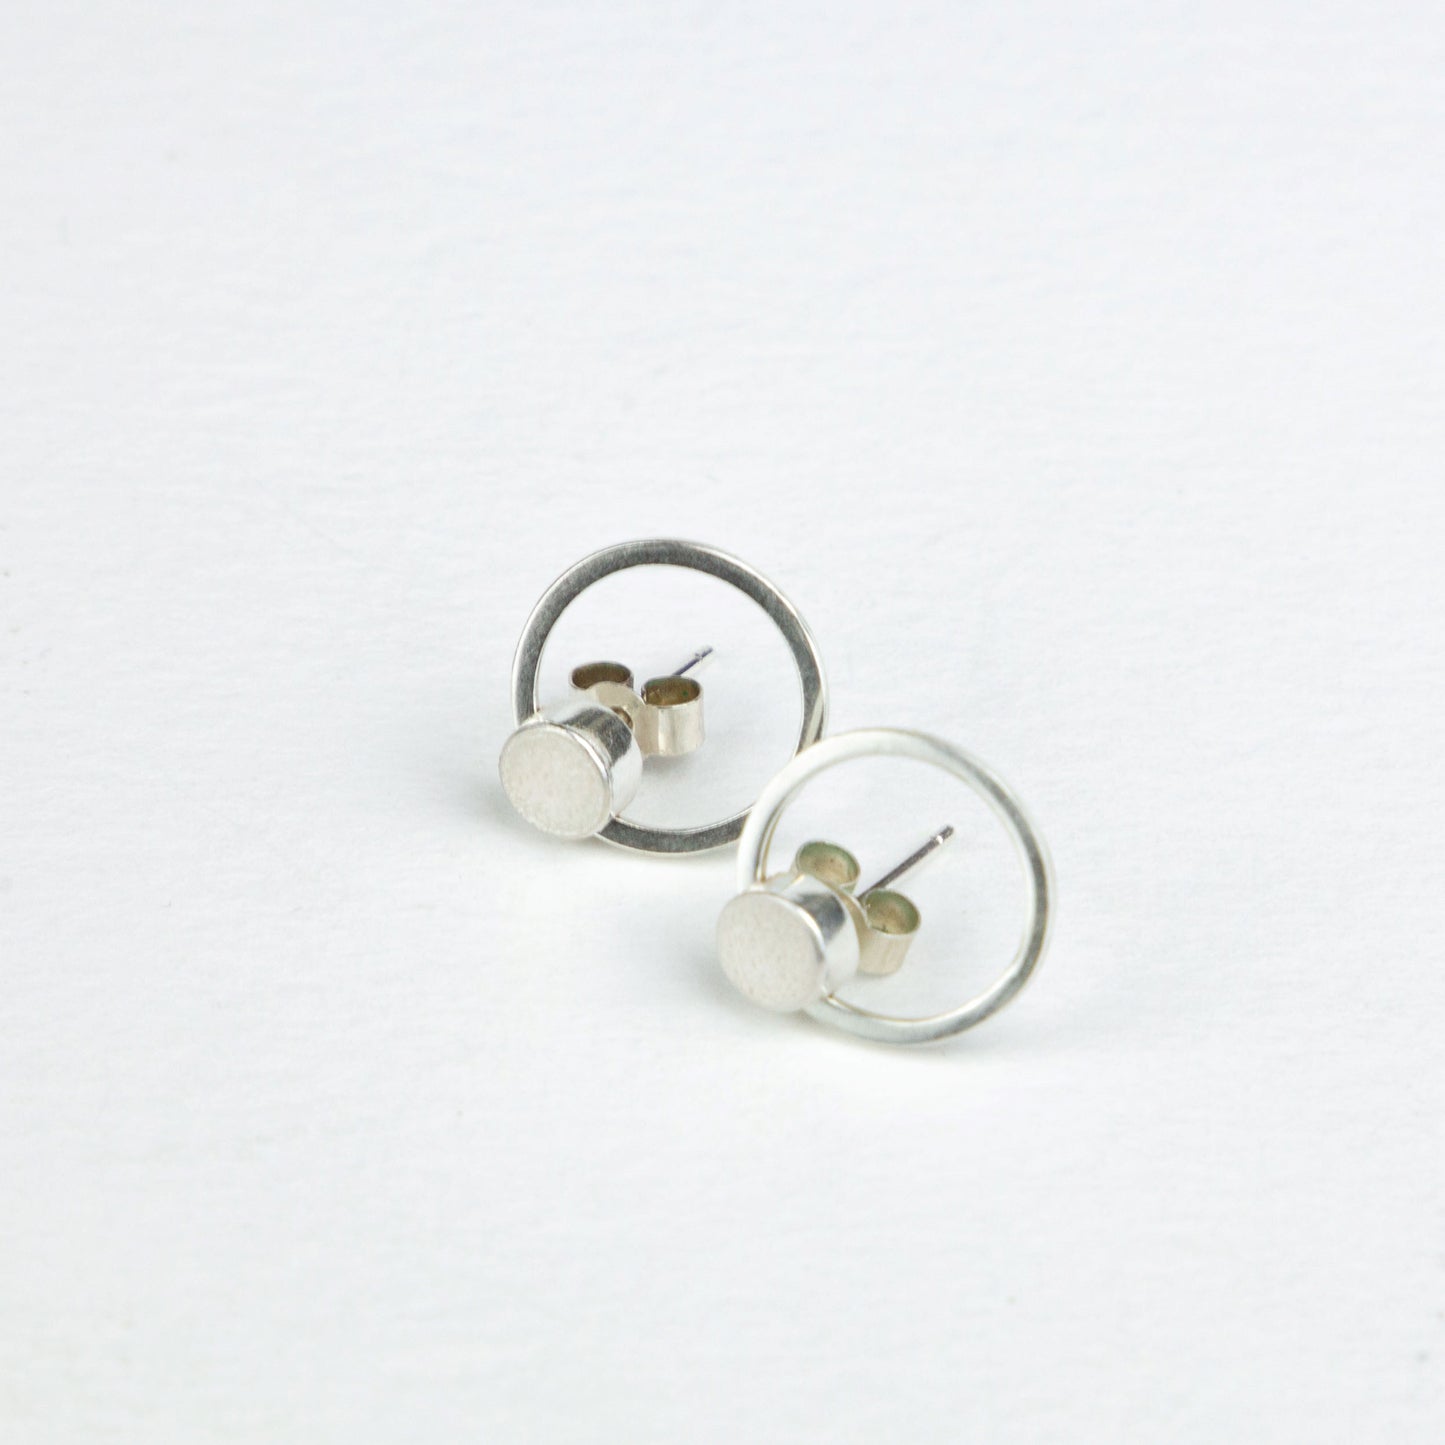 Orbit earrings, with a textured disc in silver and gold and a larger orbiting ring in silver